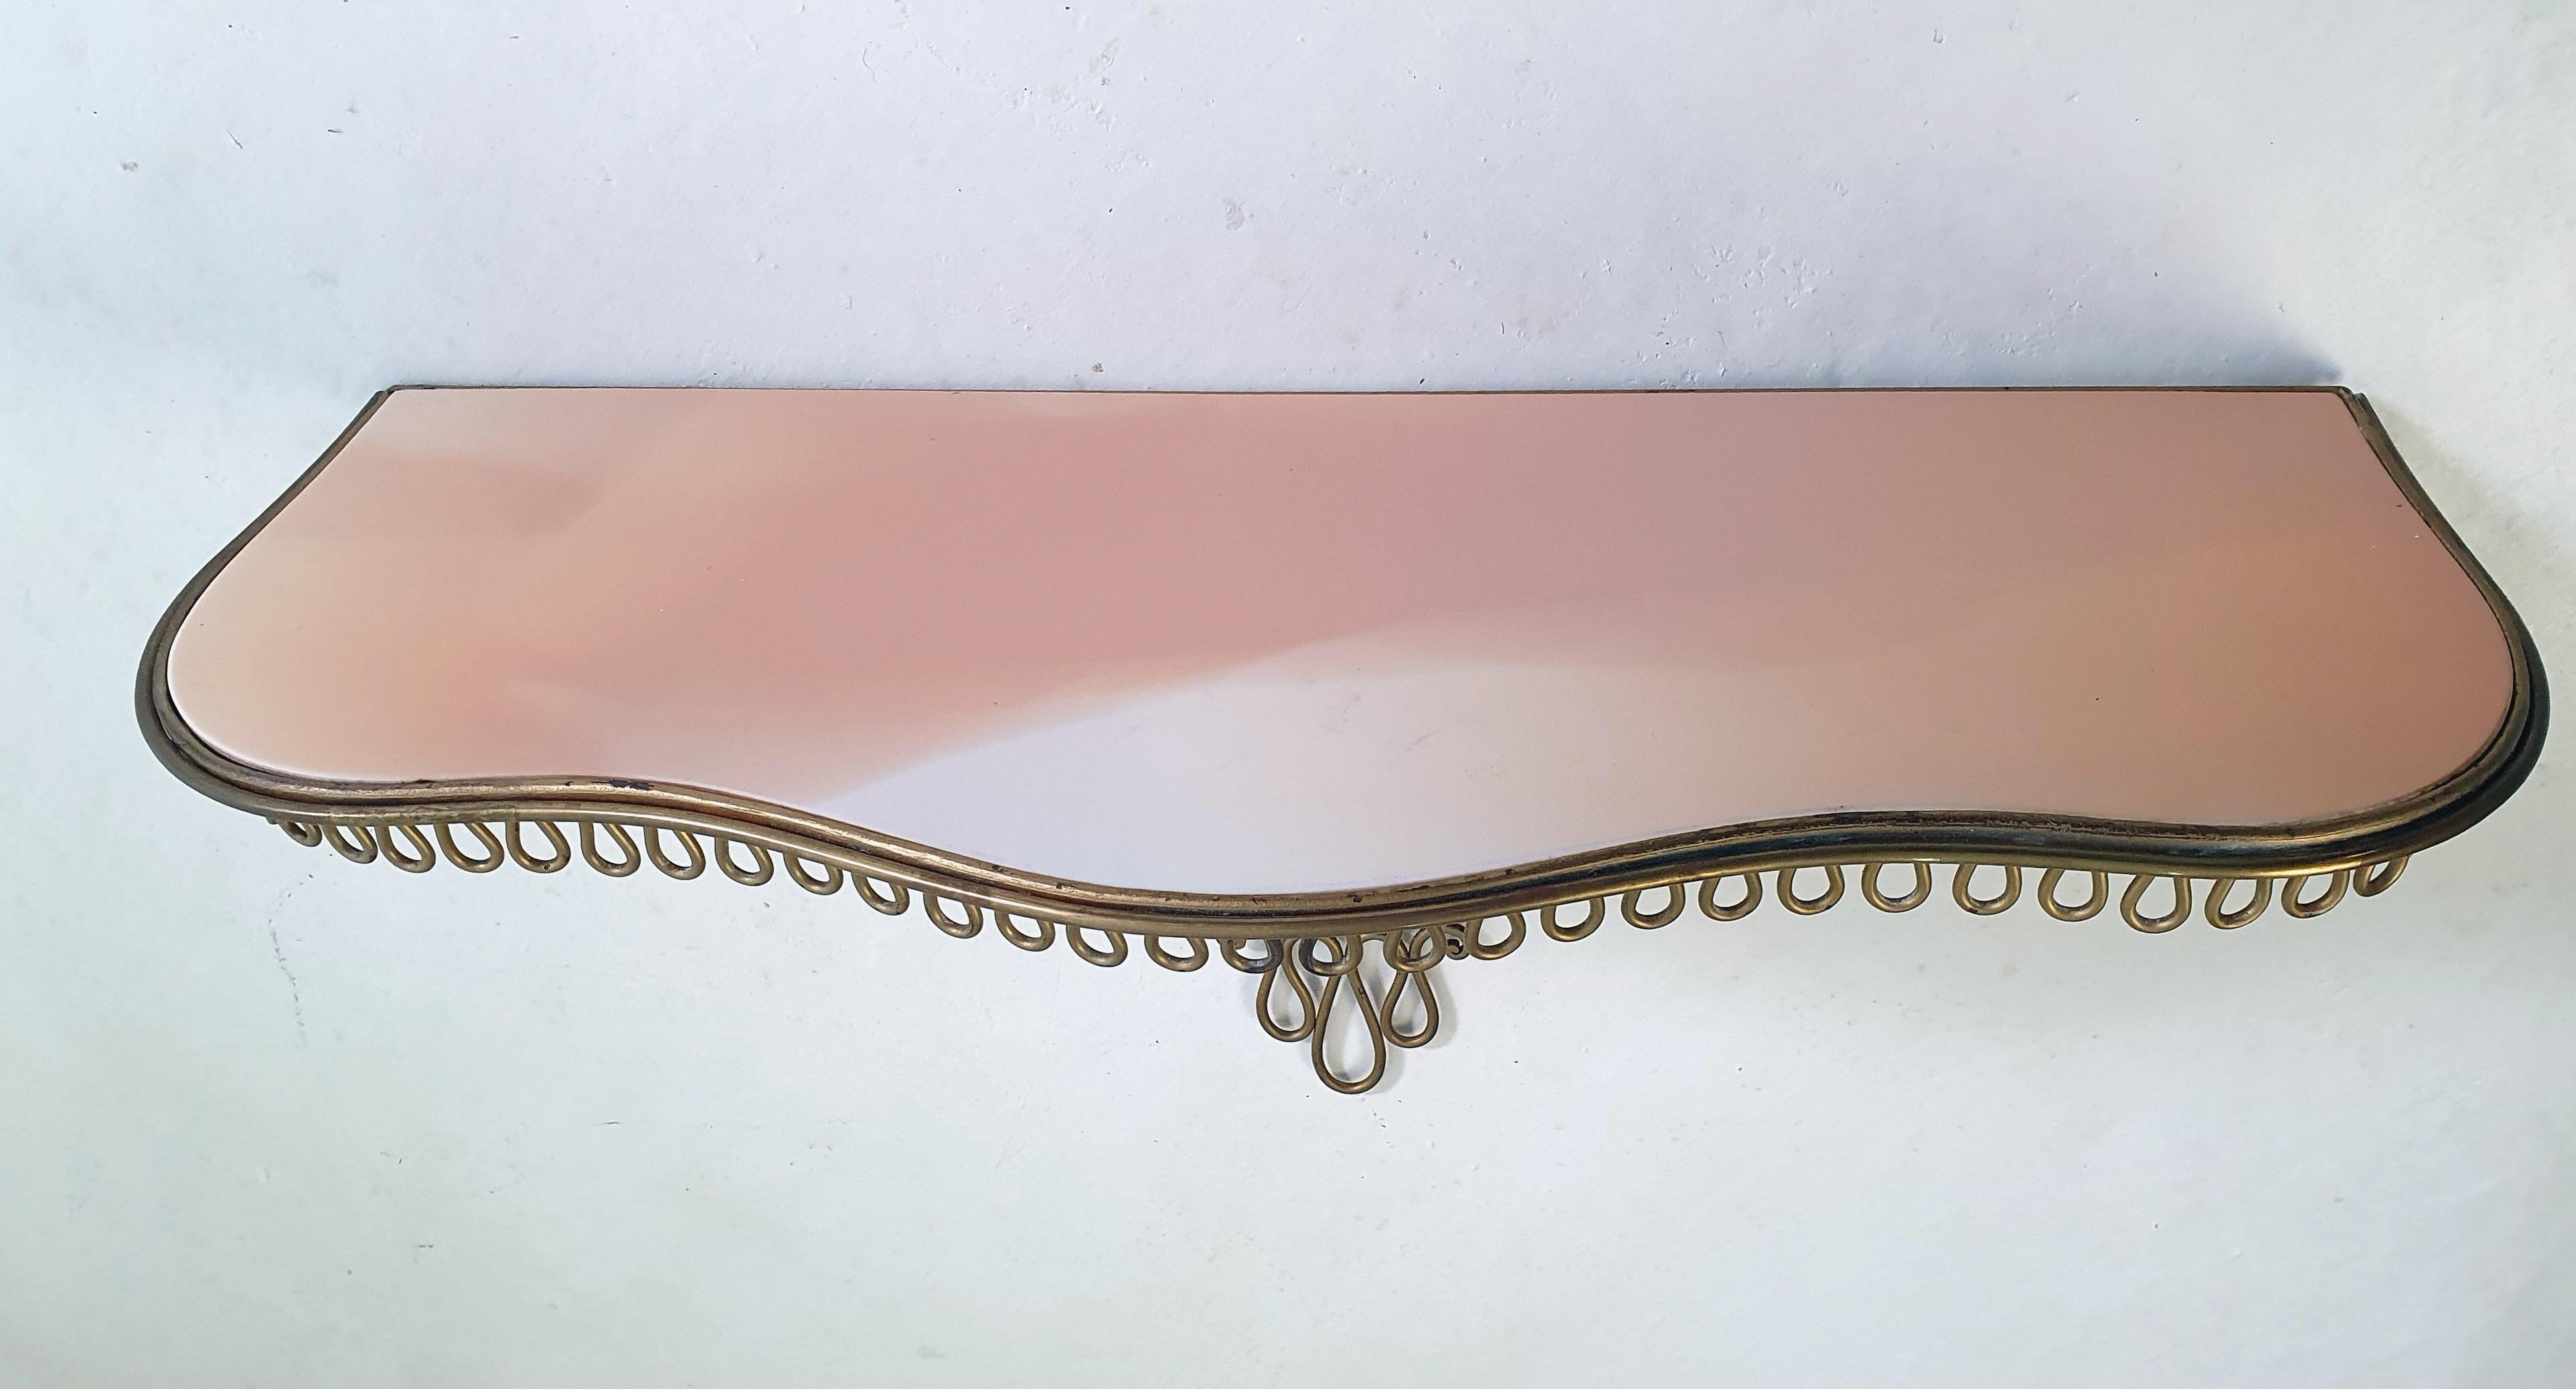 A lovely Italian console table in brass with a black glass top made in the 1950s. It is sturdy once mounted on the wall and in good condition. No cracks to the glass which has a wonderful peach pink tone.